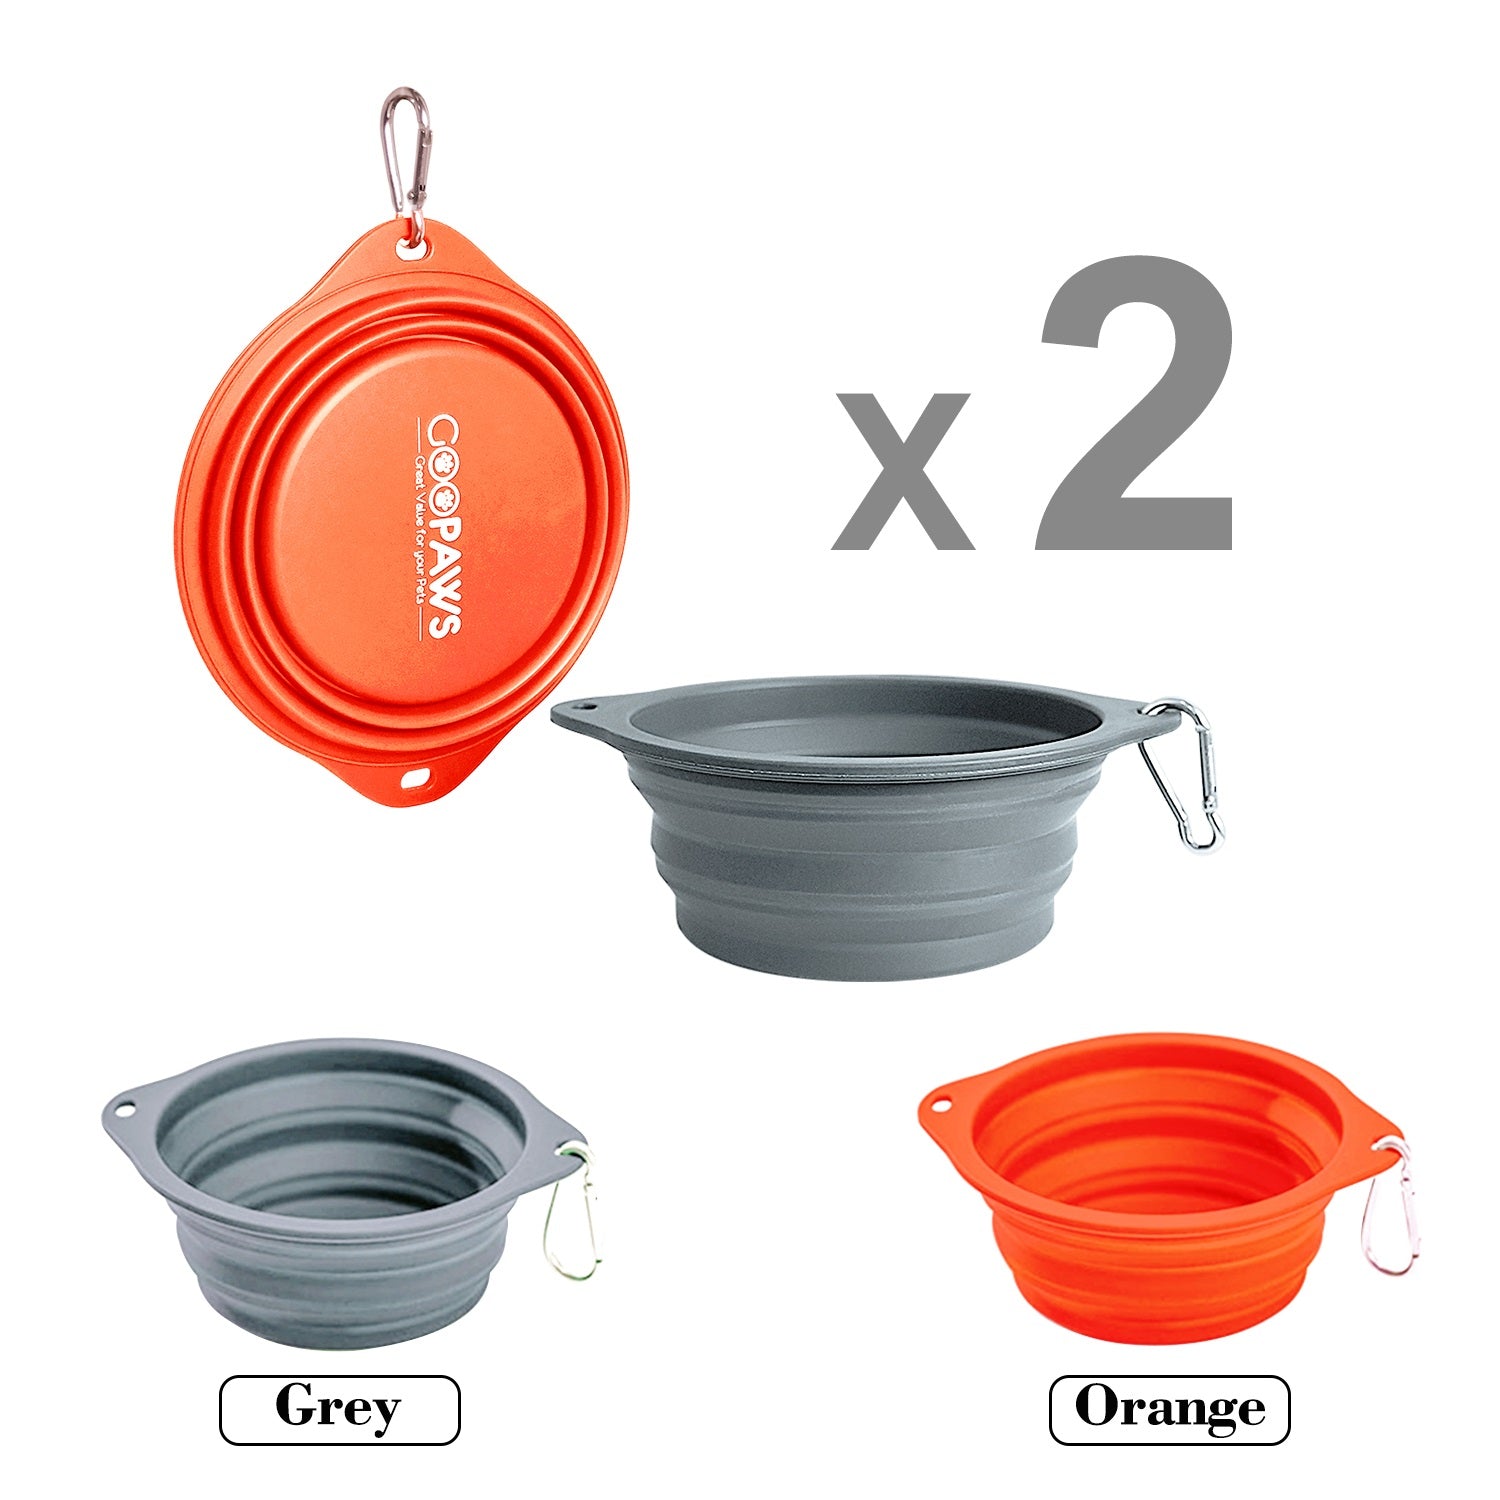 GOOPAWS 2 Pack Silicone Non-Skid Travel Dog and Cat Bowl, Orange&Grey